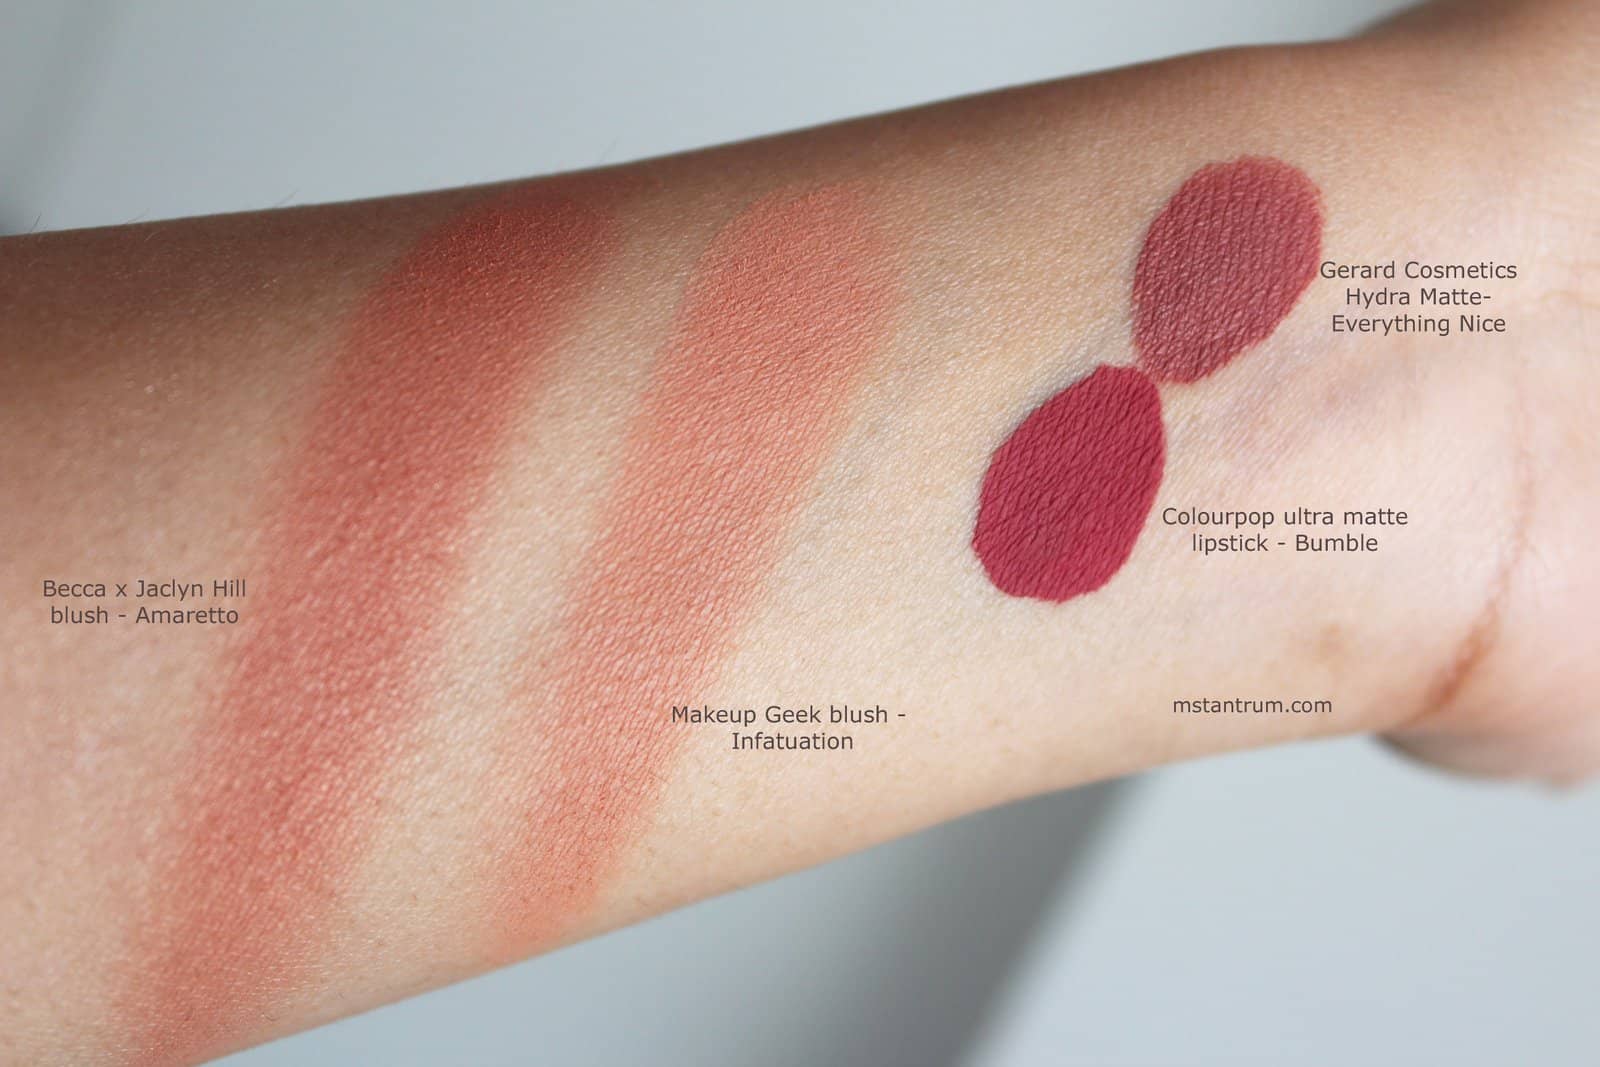 colourpop bumble & Gerard cosmetics Everything nice swatches